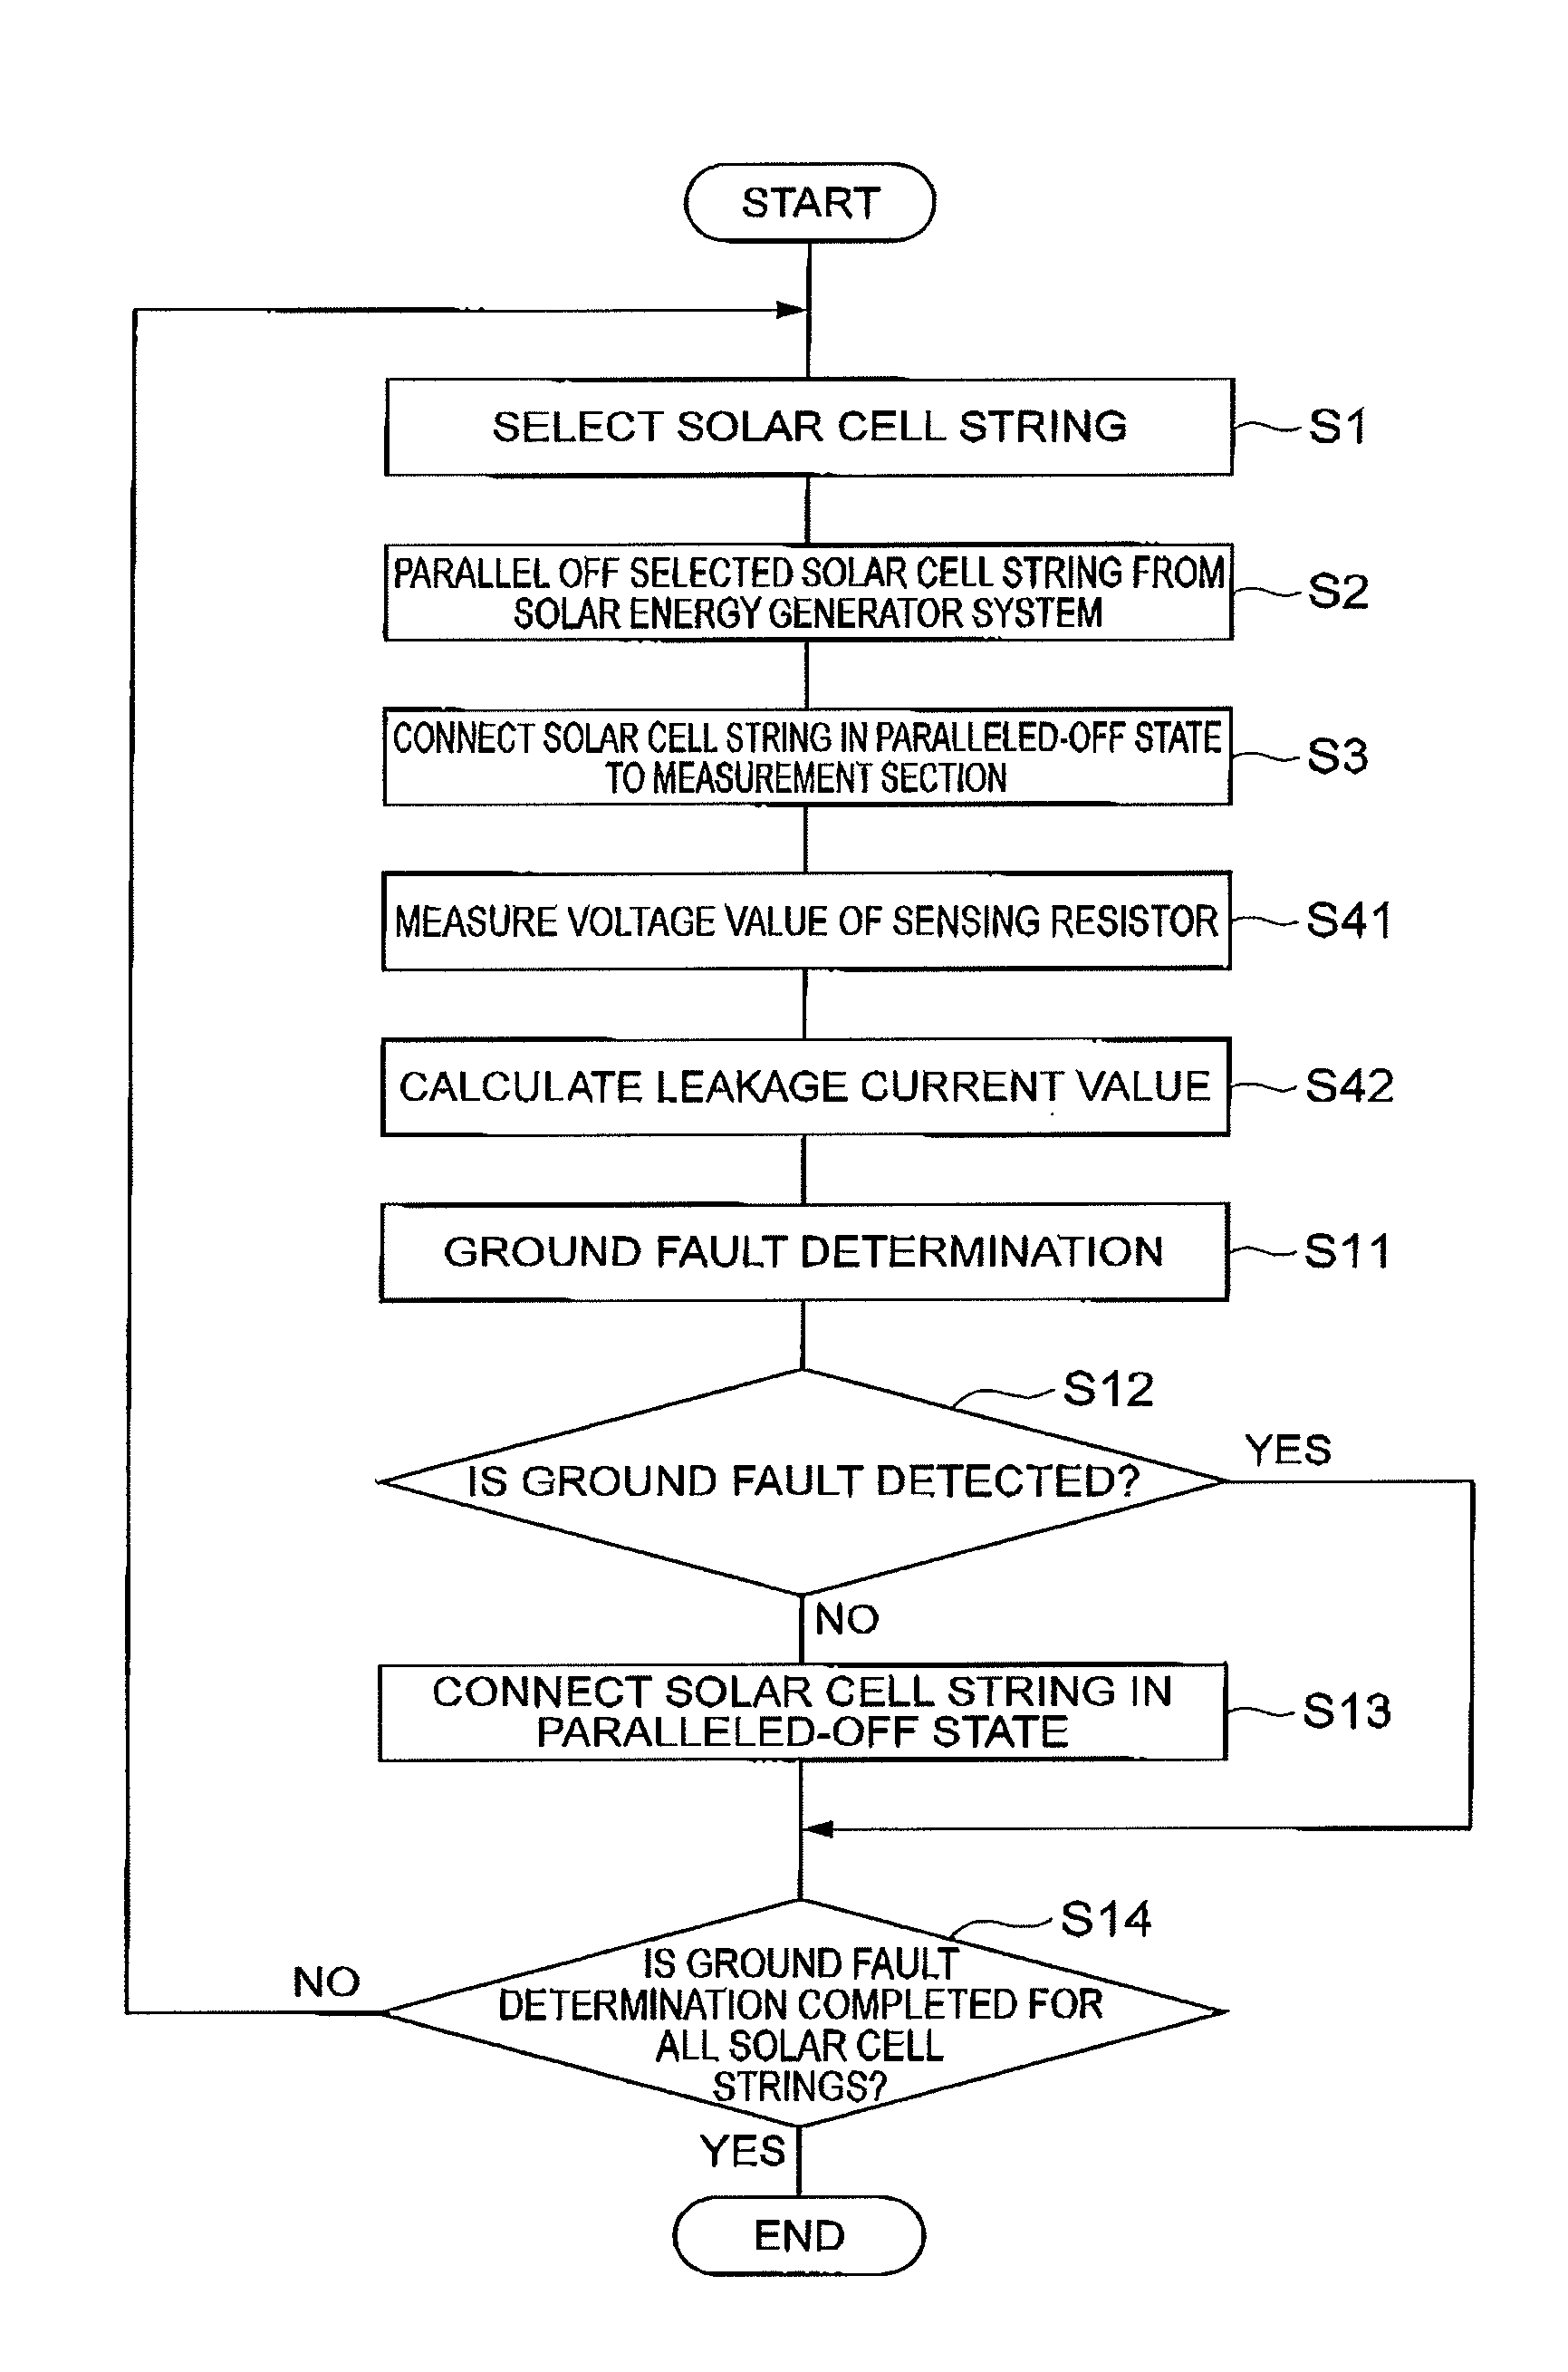 Ground fault detection device, ground fault detection method, solar energy generator system, and ground fault detection program